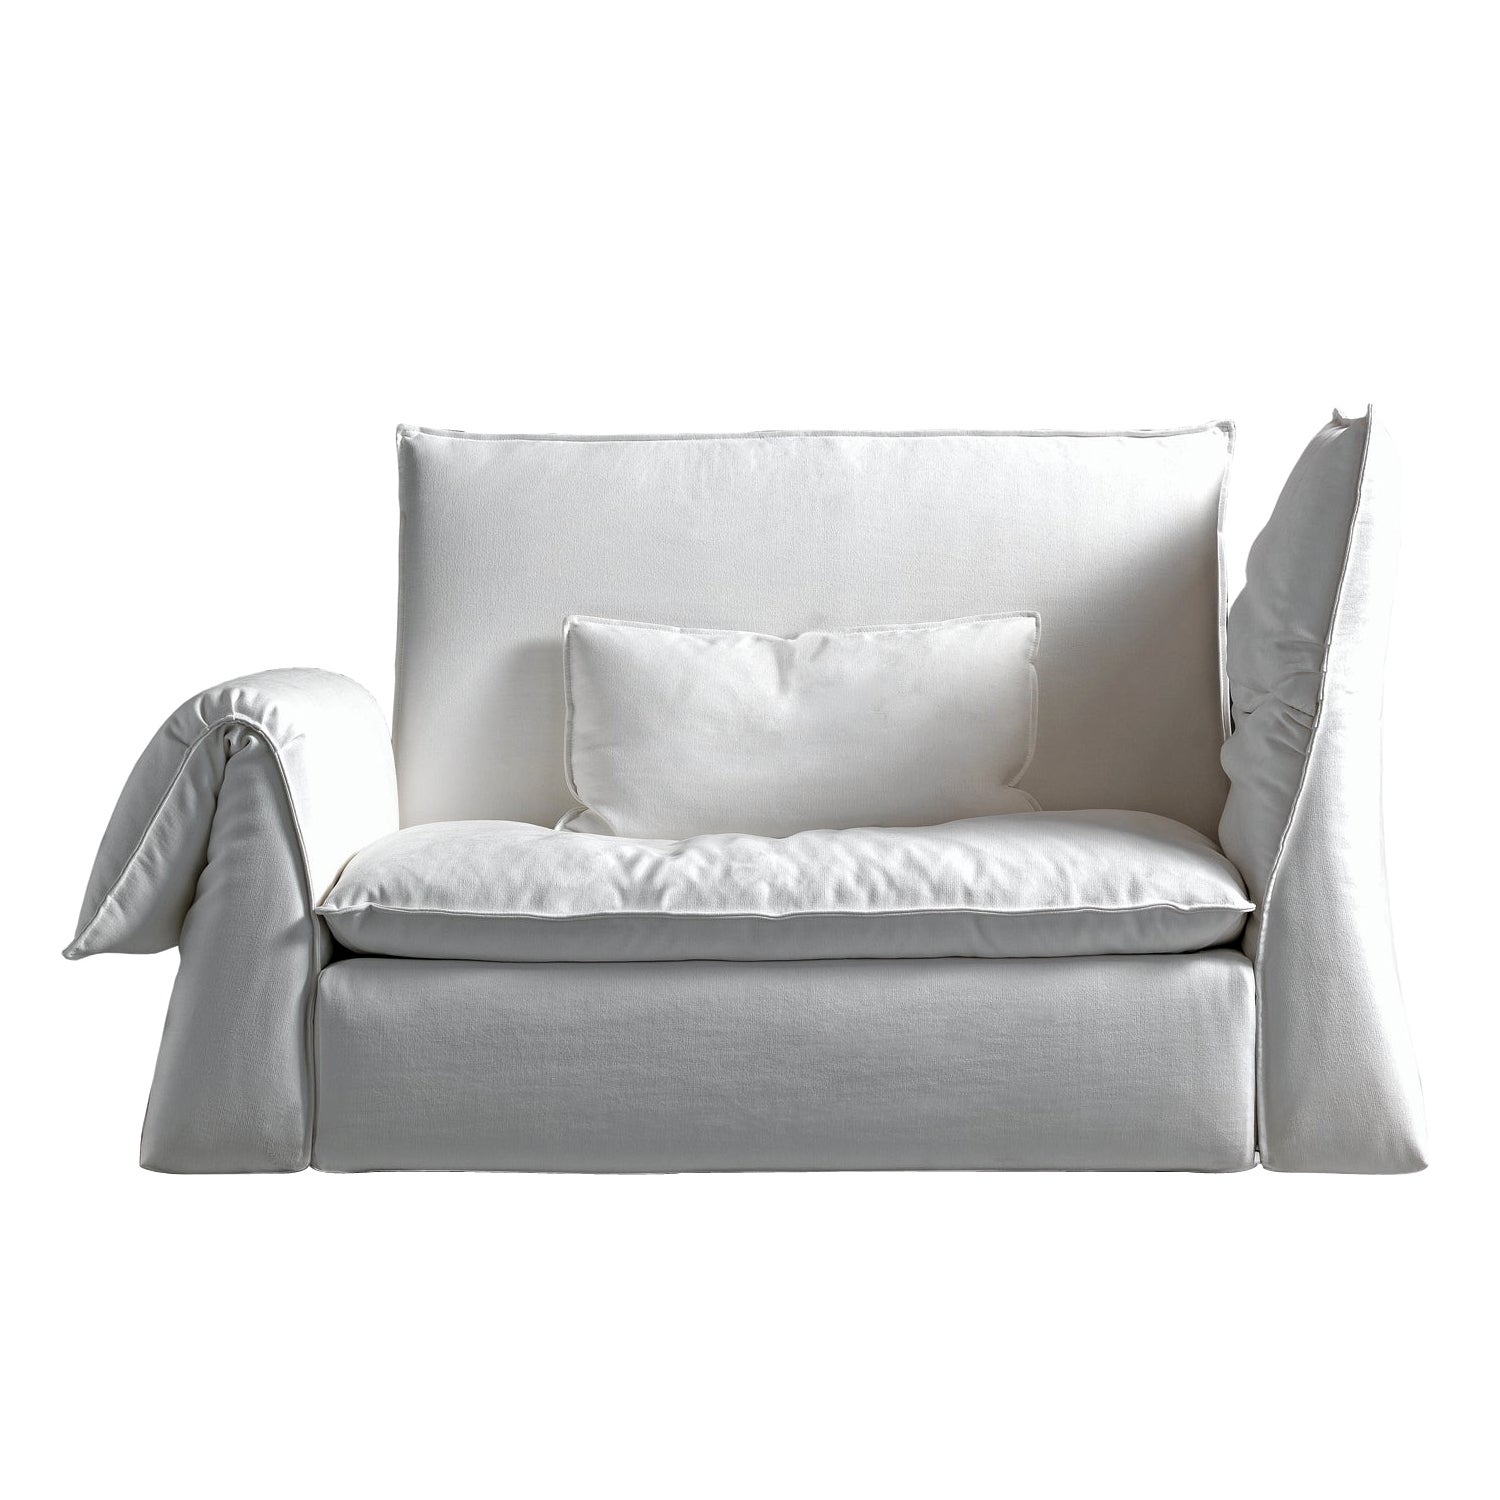 Les Femmes Large Foldable Armchair in Byblos White Upholstery by Giuseppe Viganò For Sale